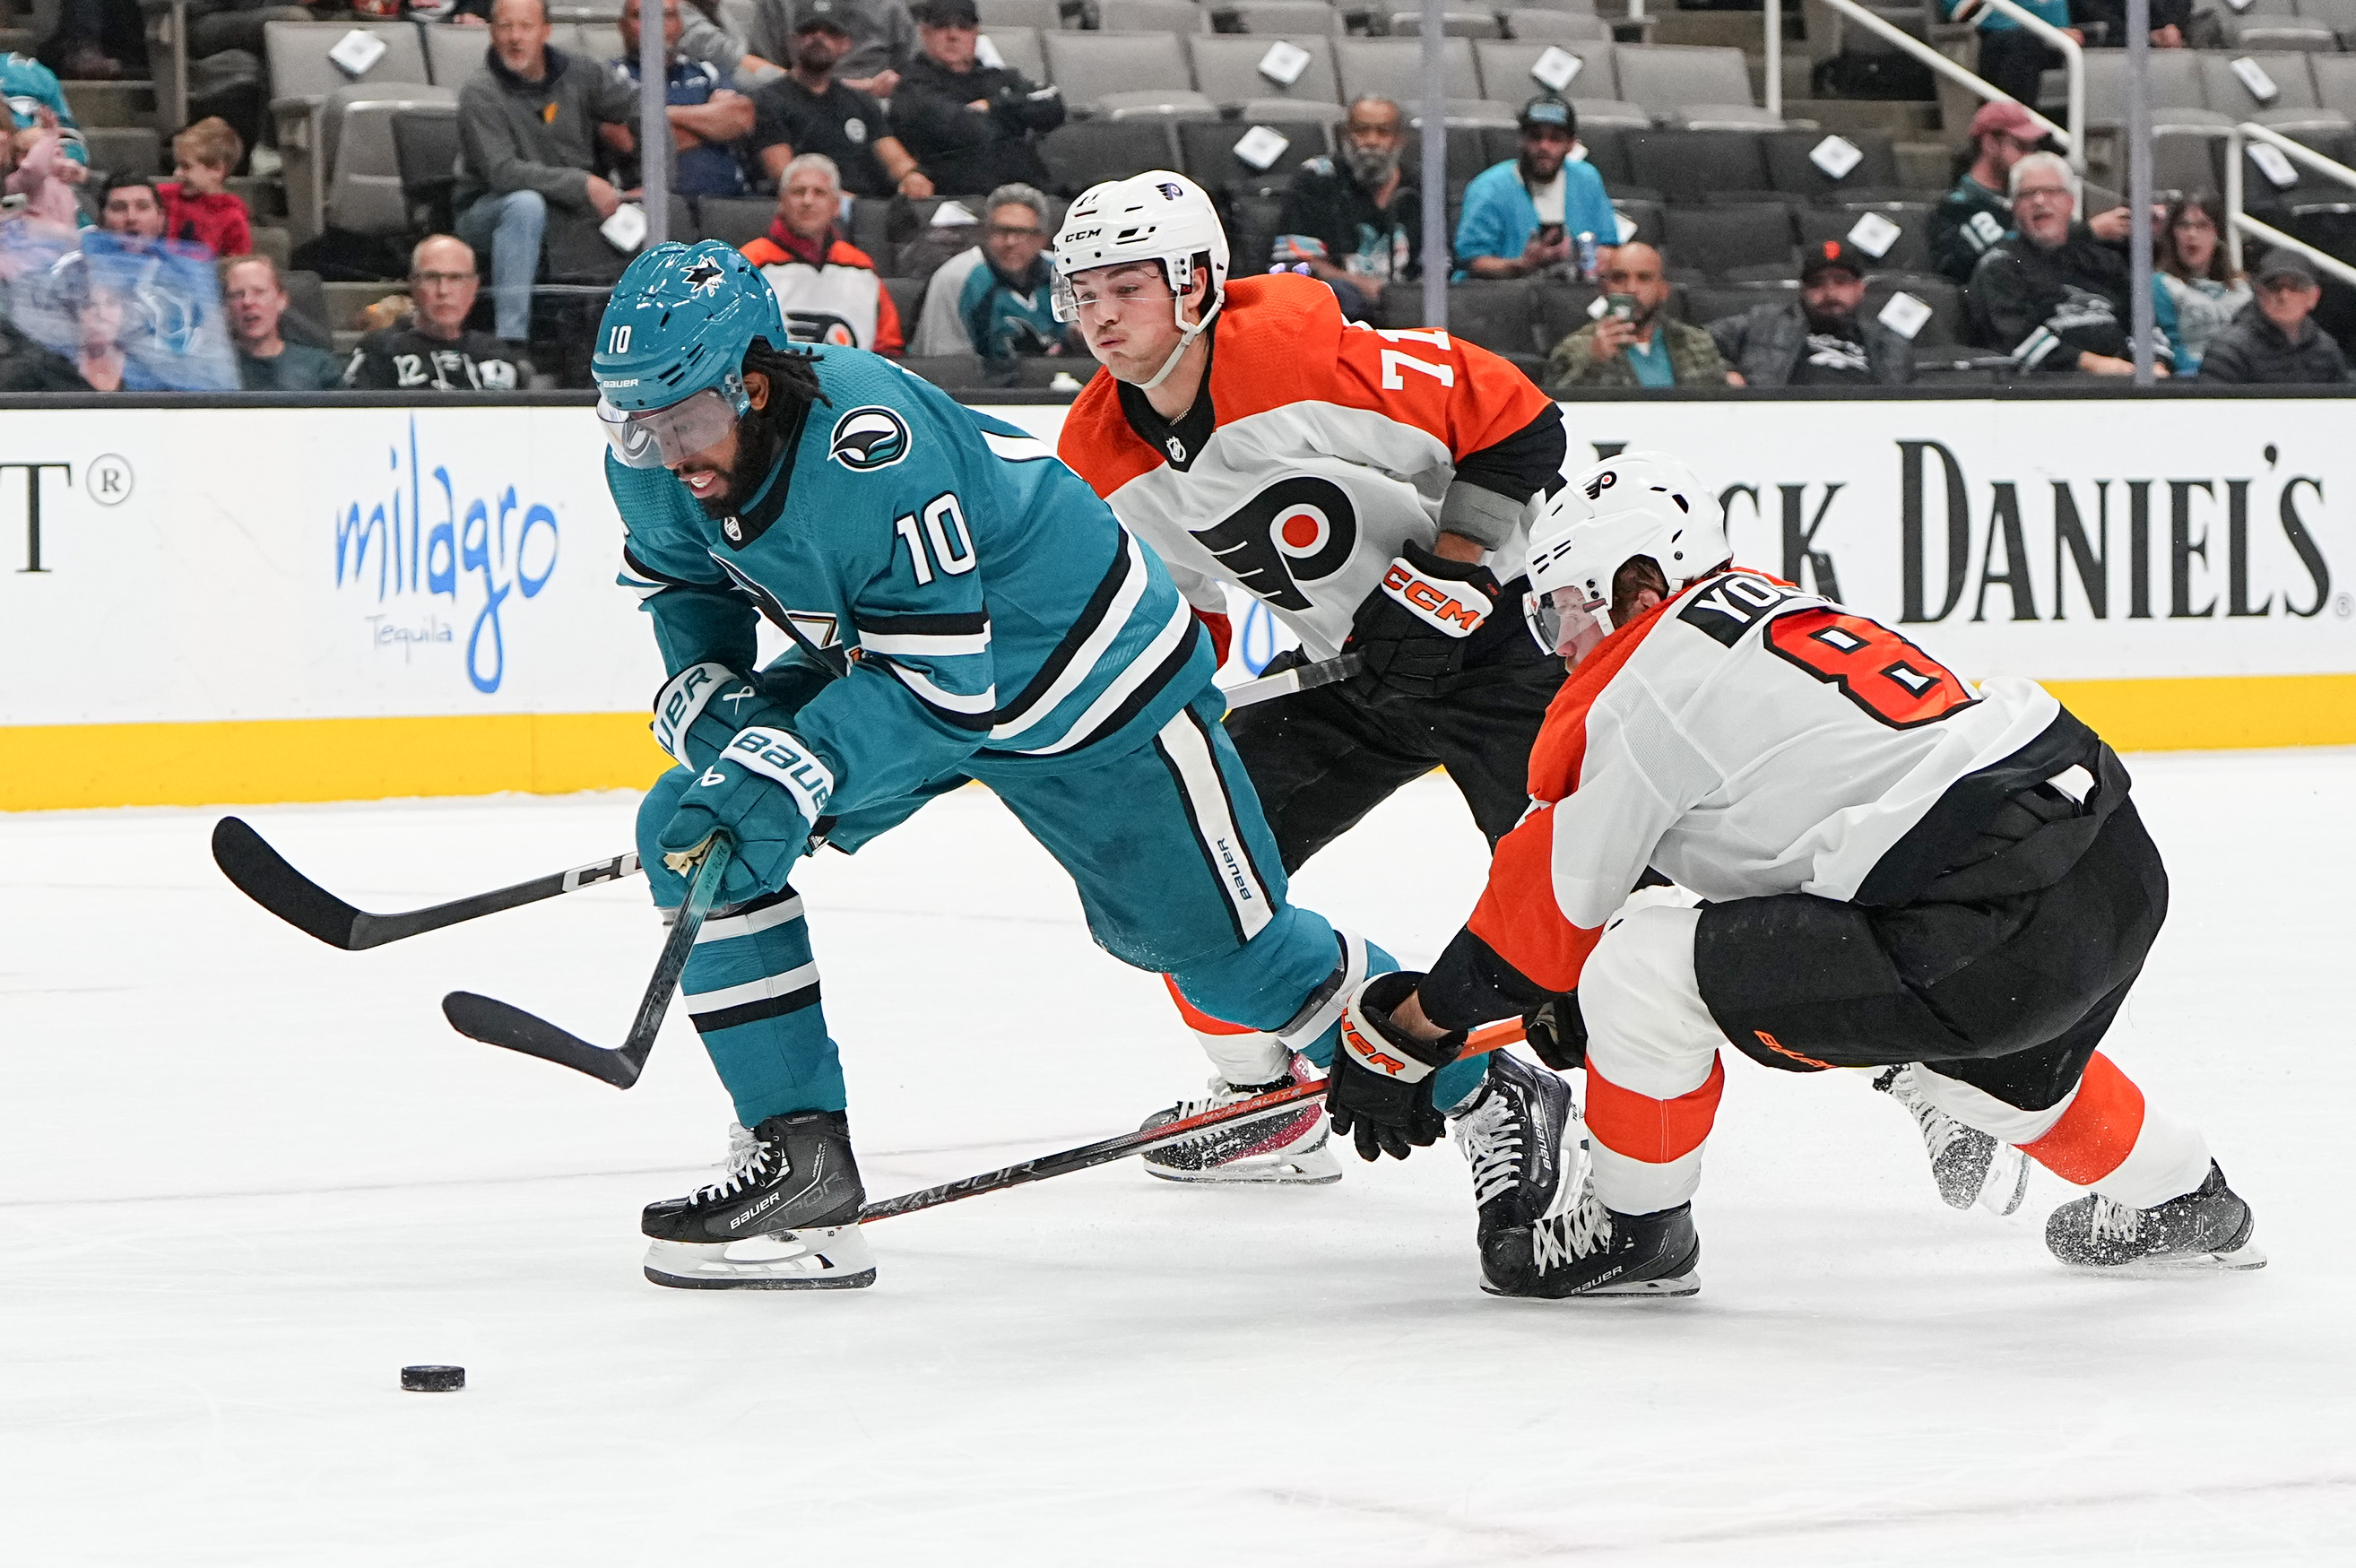 SAN JOSE, CALIFORNIA - NOVEMBER 7: Anthony Duclair #10 of the San Jose Sharks skating with the puck against the Philadelphia Flyers at SAP Center on November 7, 2023 in San Jose, California. (Photo by Andreea Cardani/NHLI via Getty Images)